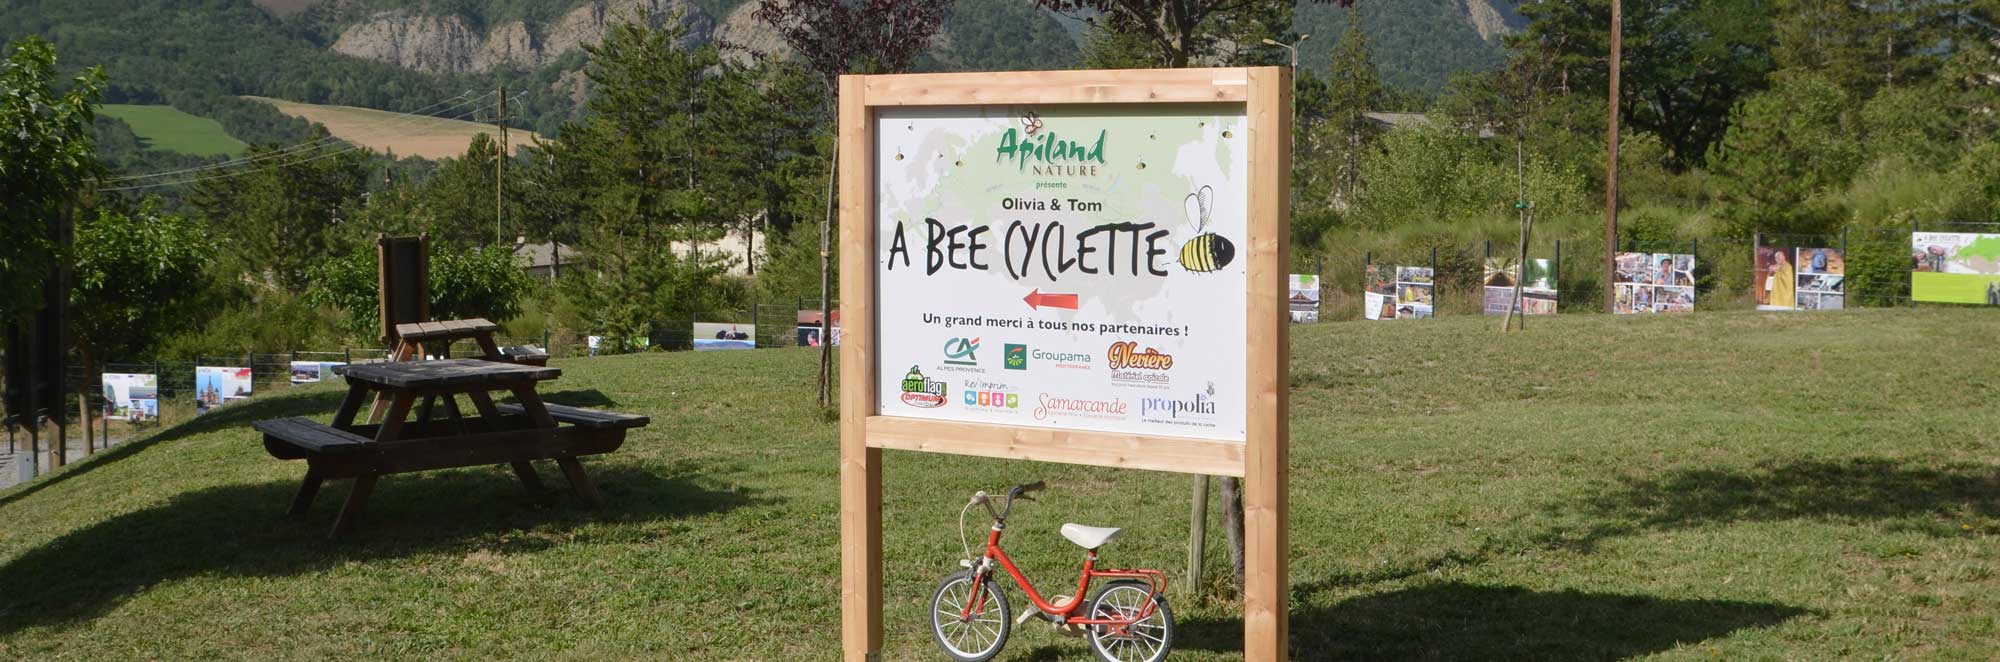 A Bee cyclette